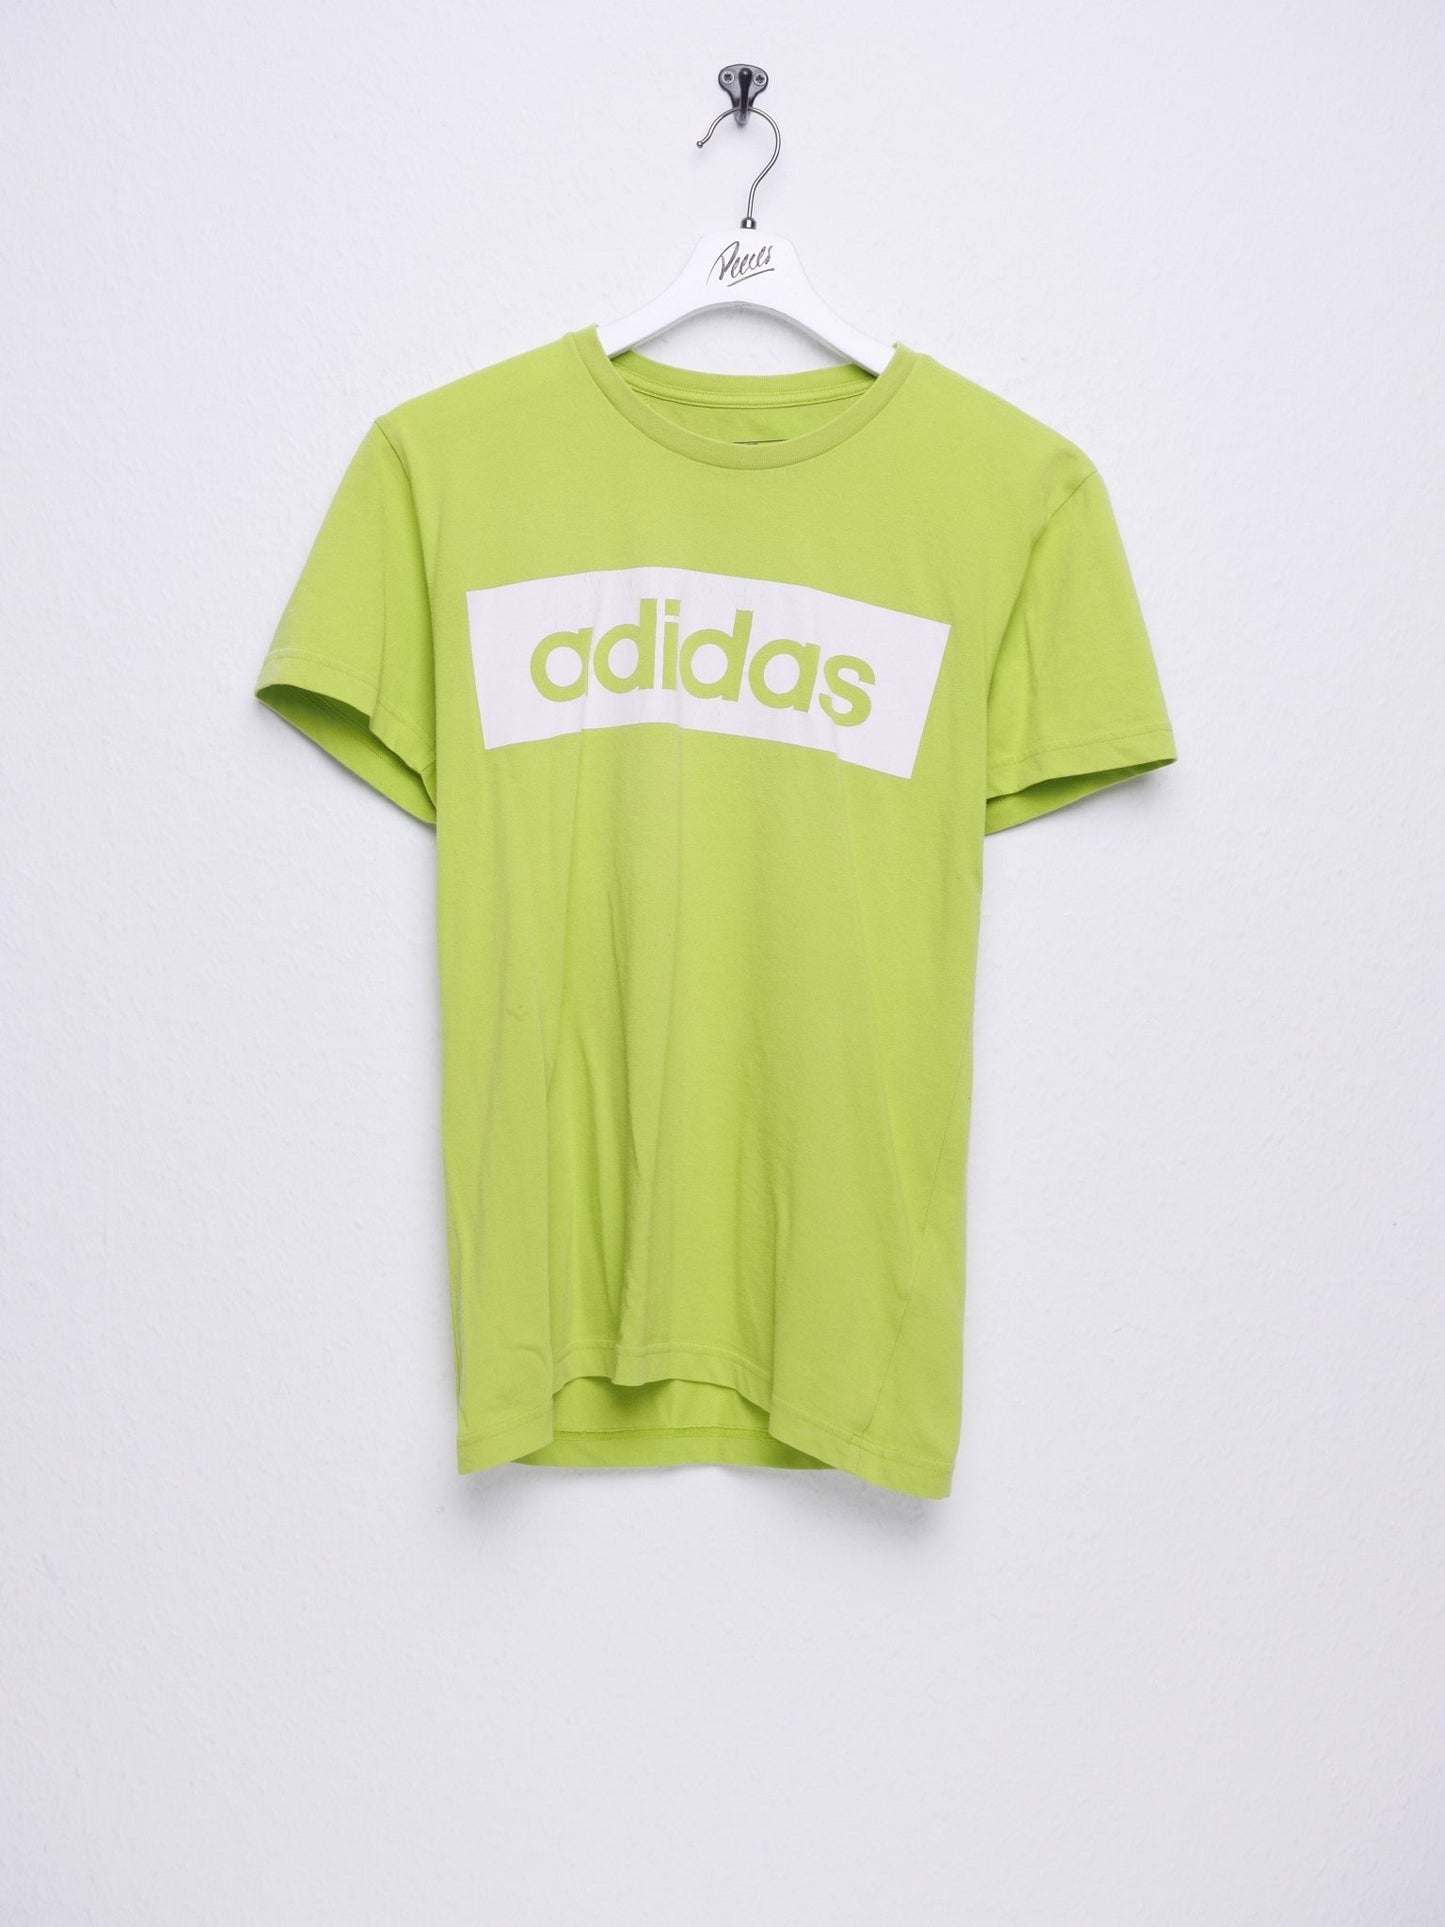 adidas printed Spellout Vintage Shirt - Peeces